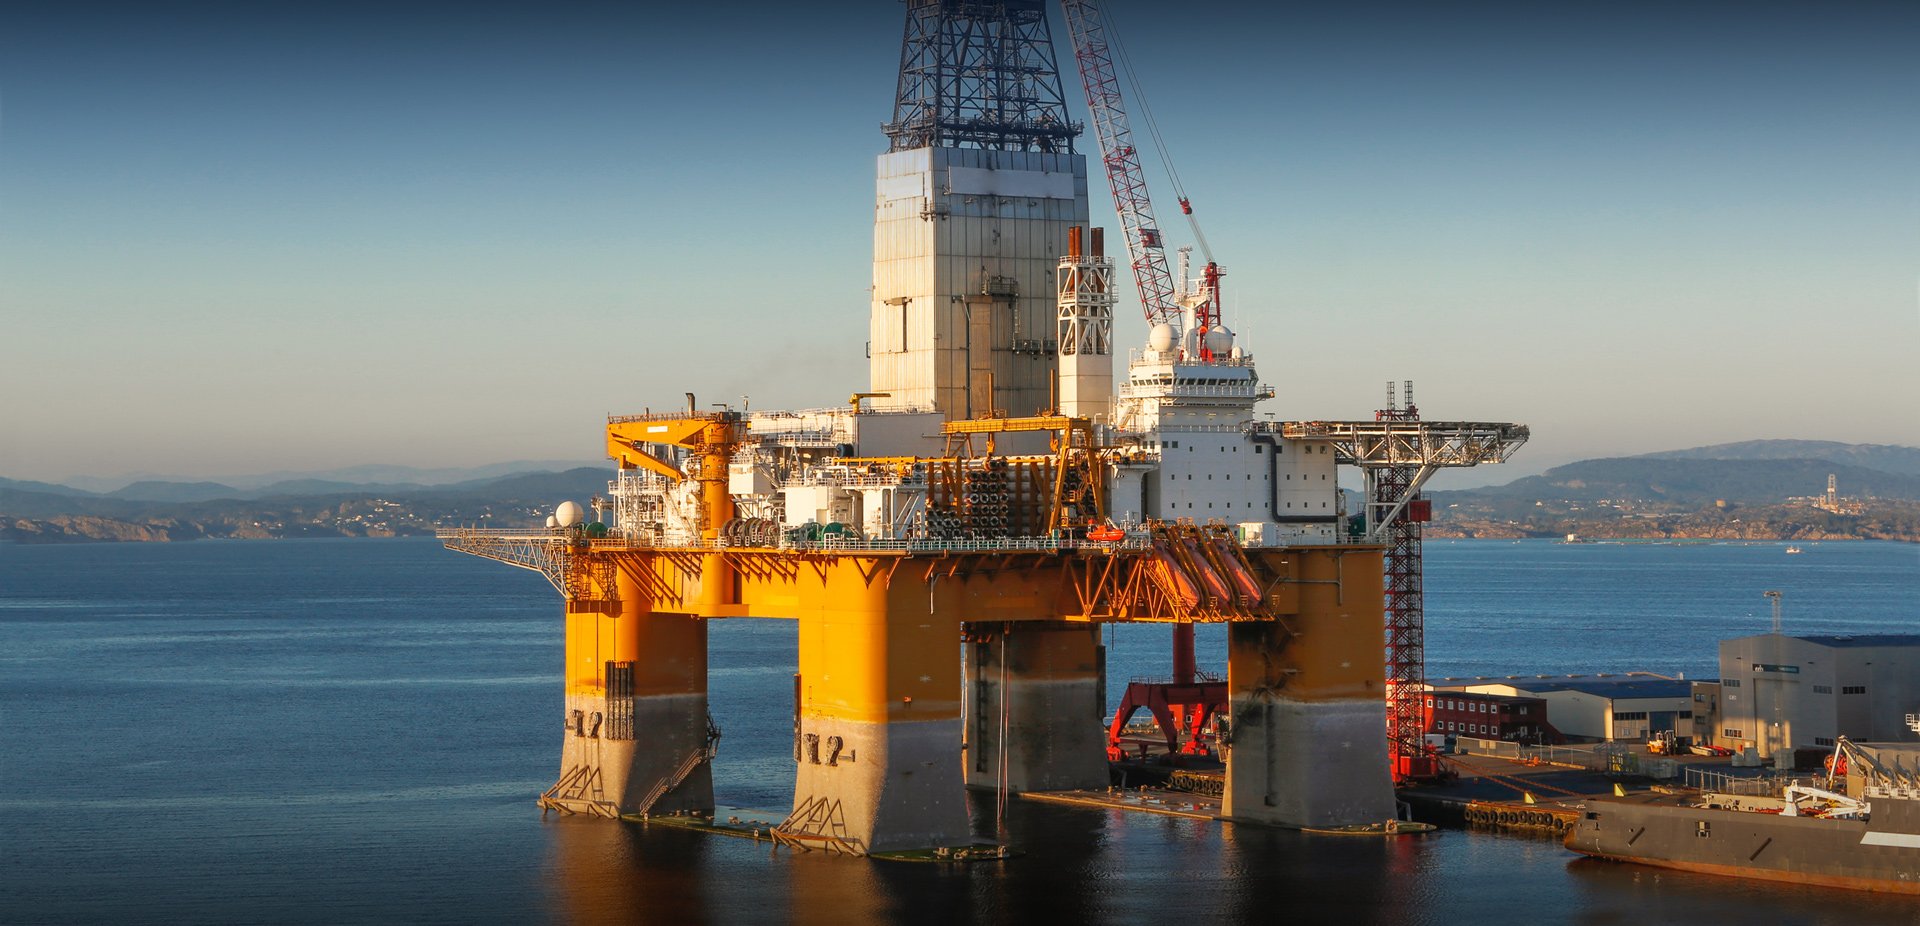 ICON Engineering - Oil and gas engineering services: subsea, drilling